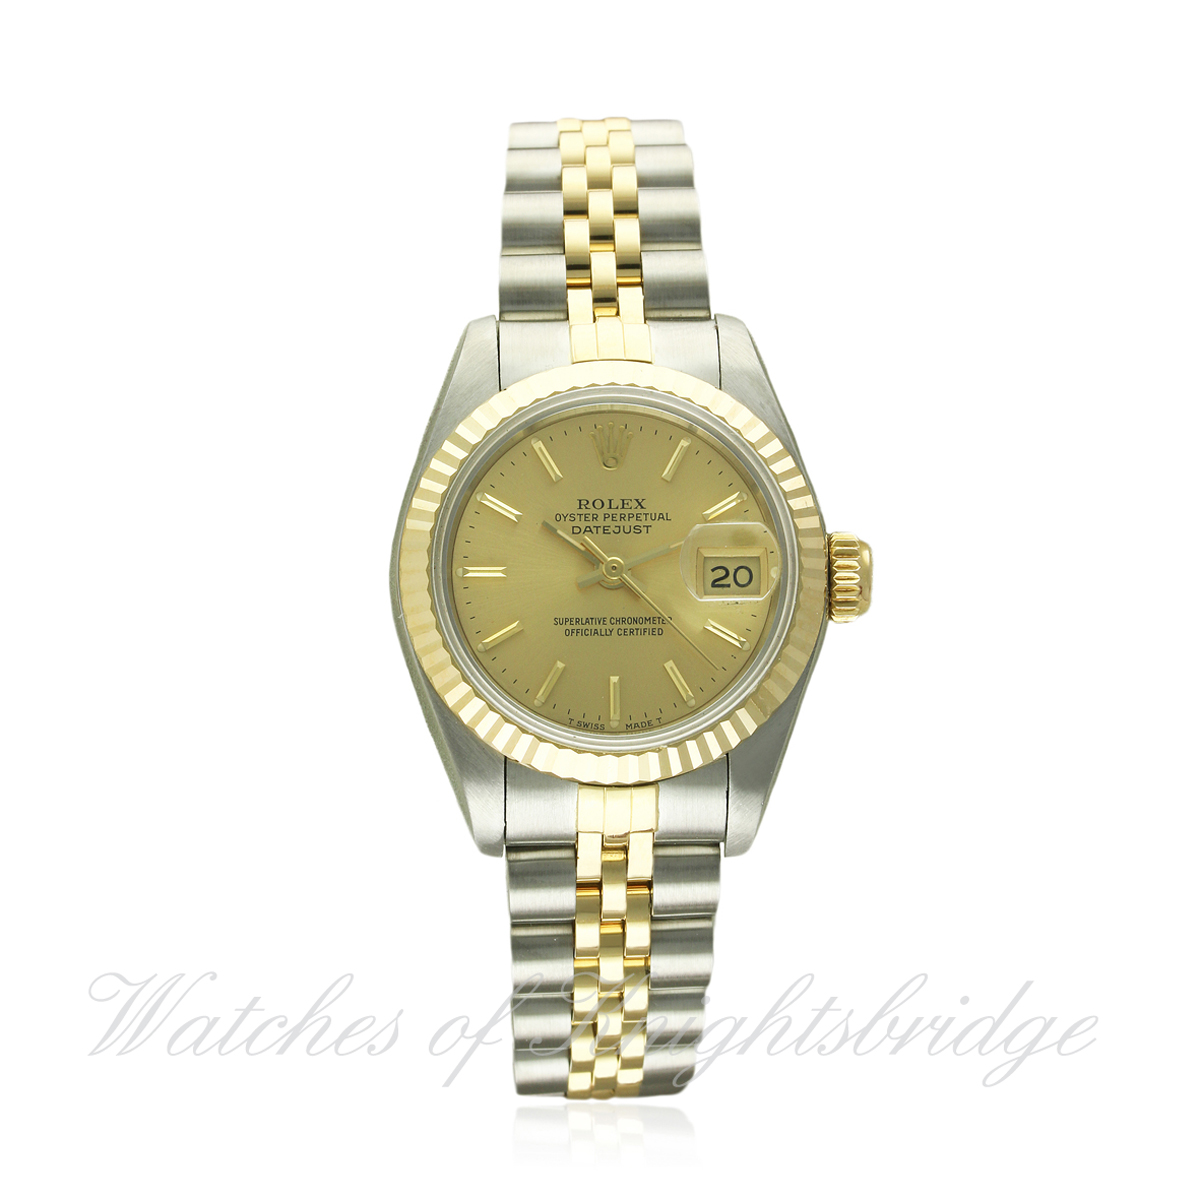 A LADIES STEEL & GOLD ROLEX OYSTER PERPETUAL DATEJUST BRACELET WATCH DATED 1993, REF. 69173 WITH BOX